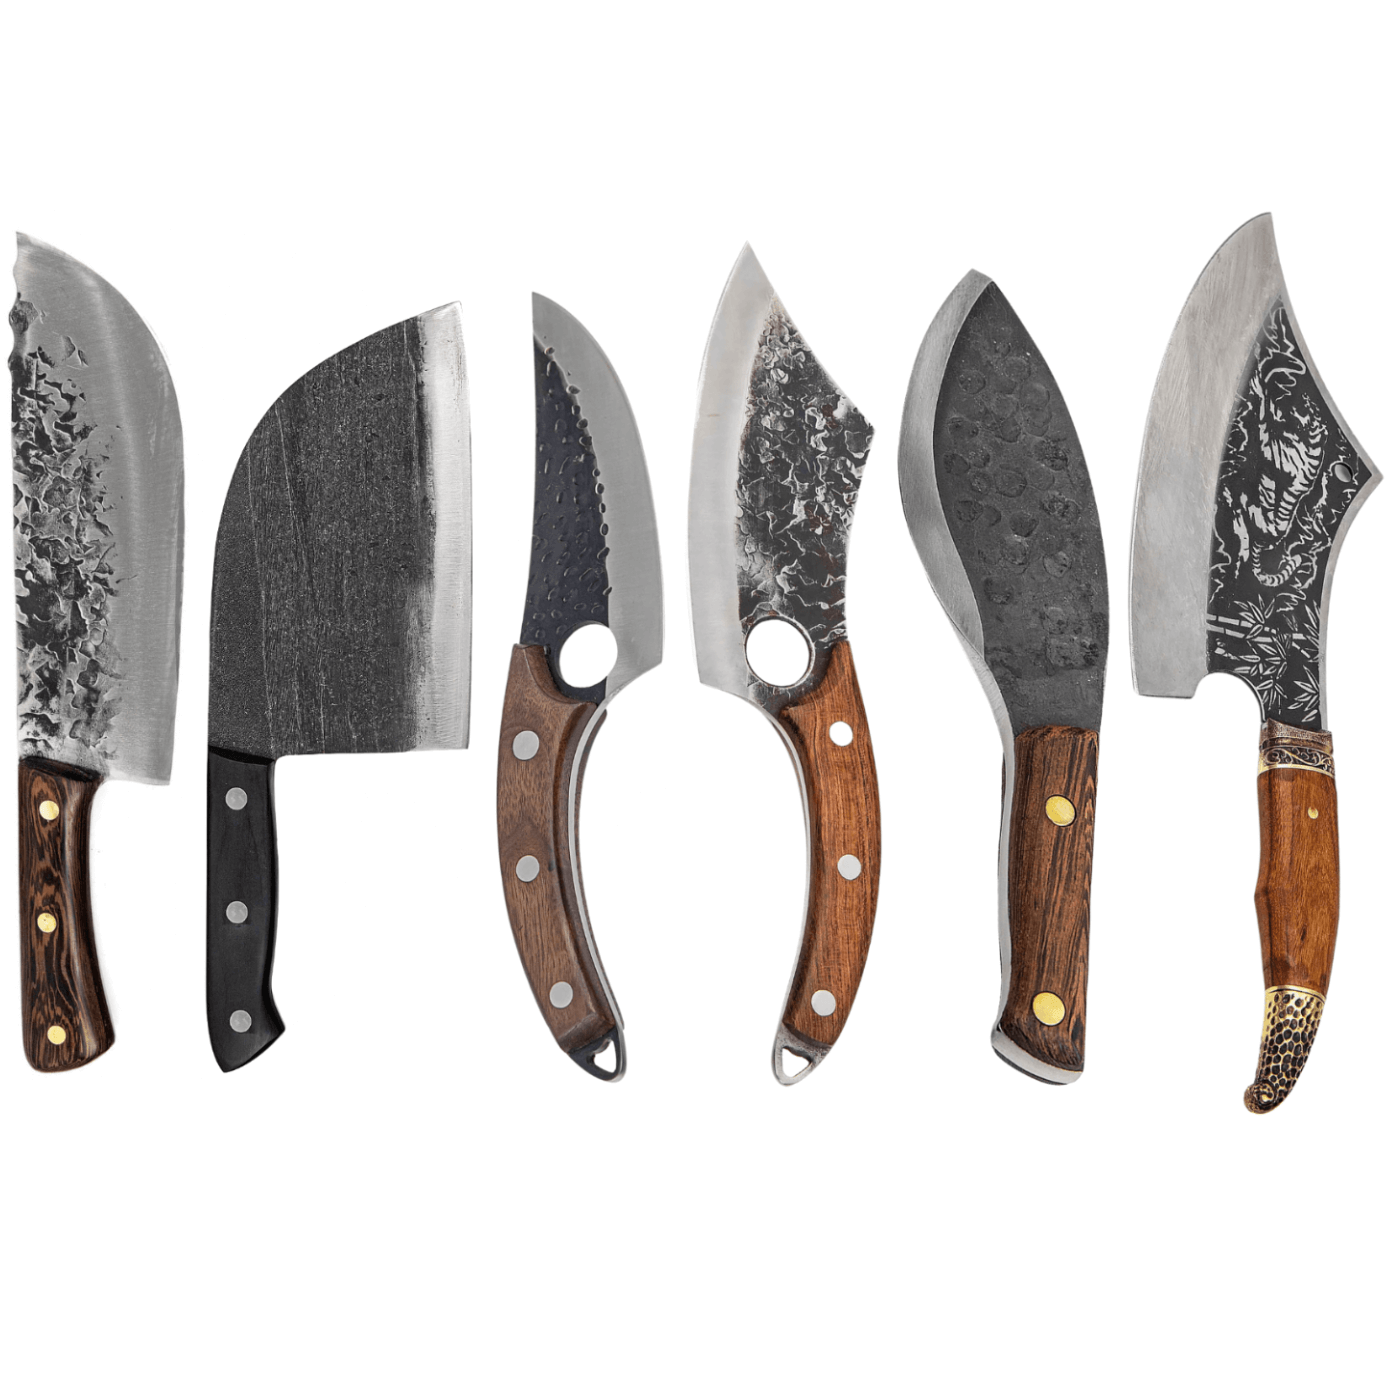 6-in-1 Caveman Bundle, composed of a Japanese Utility Knife and BBQ Knife Set